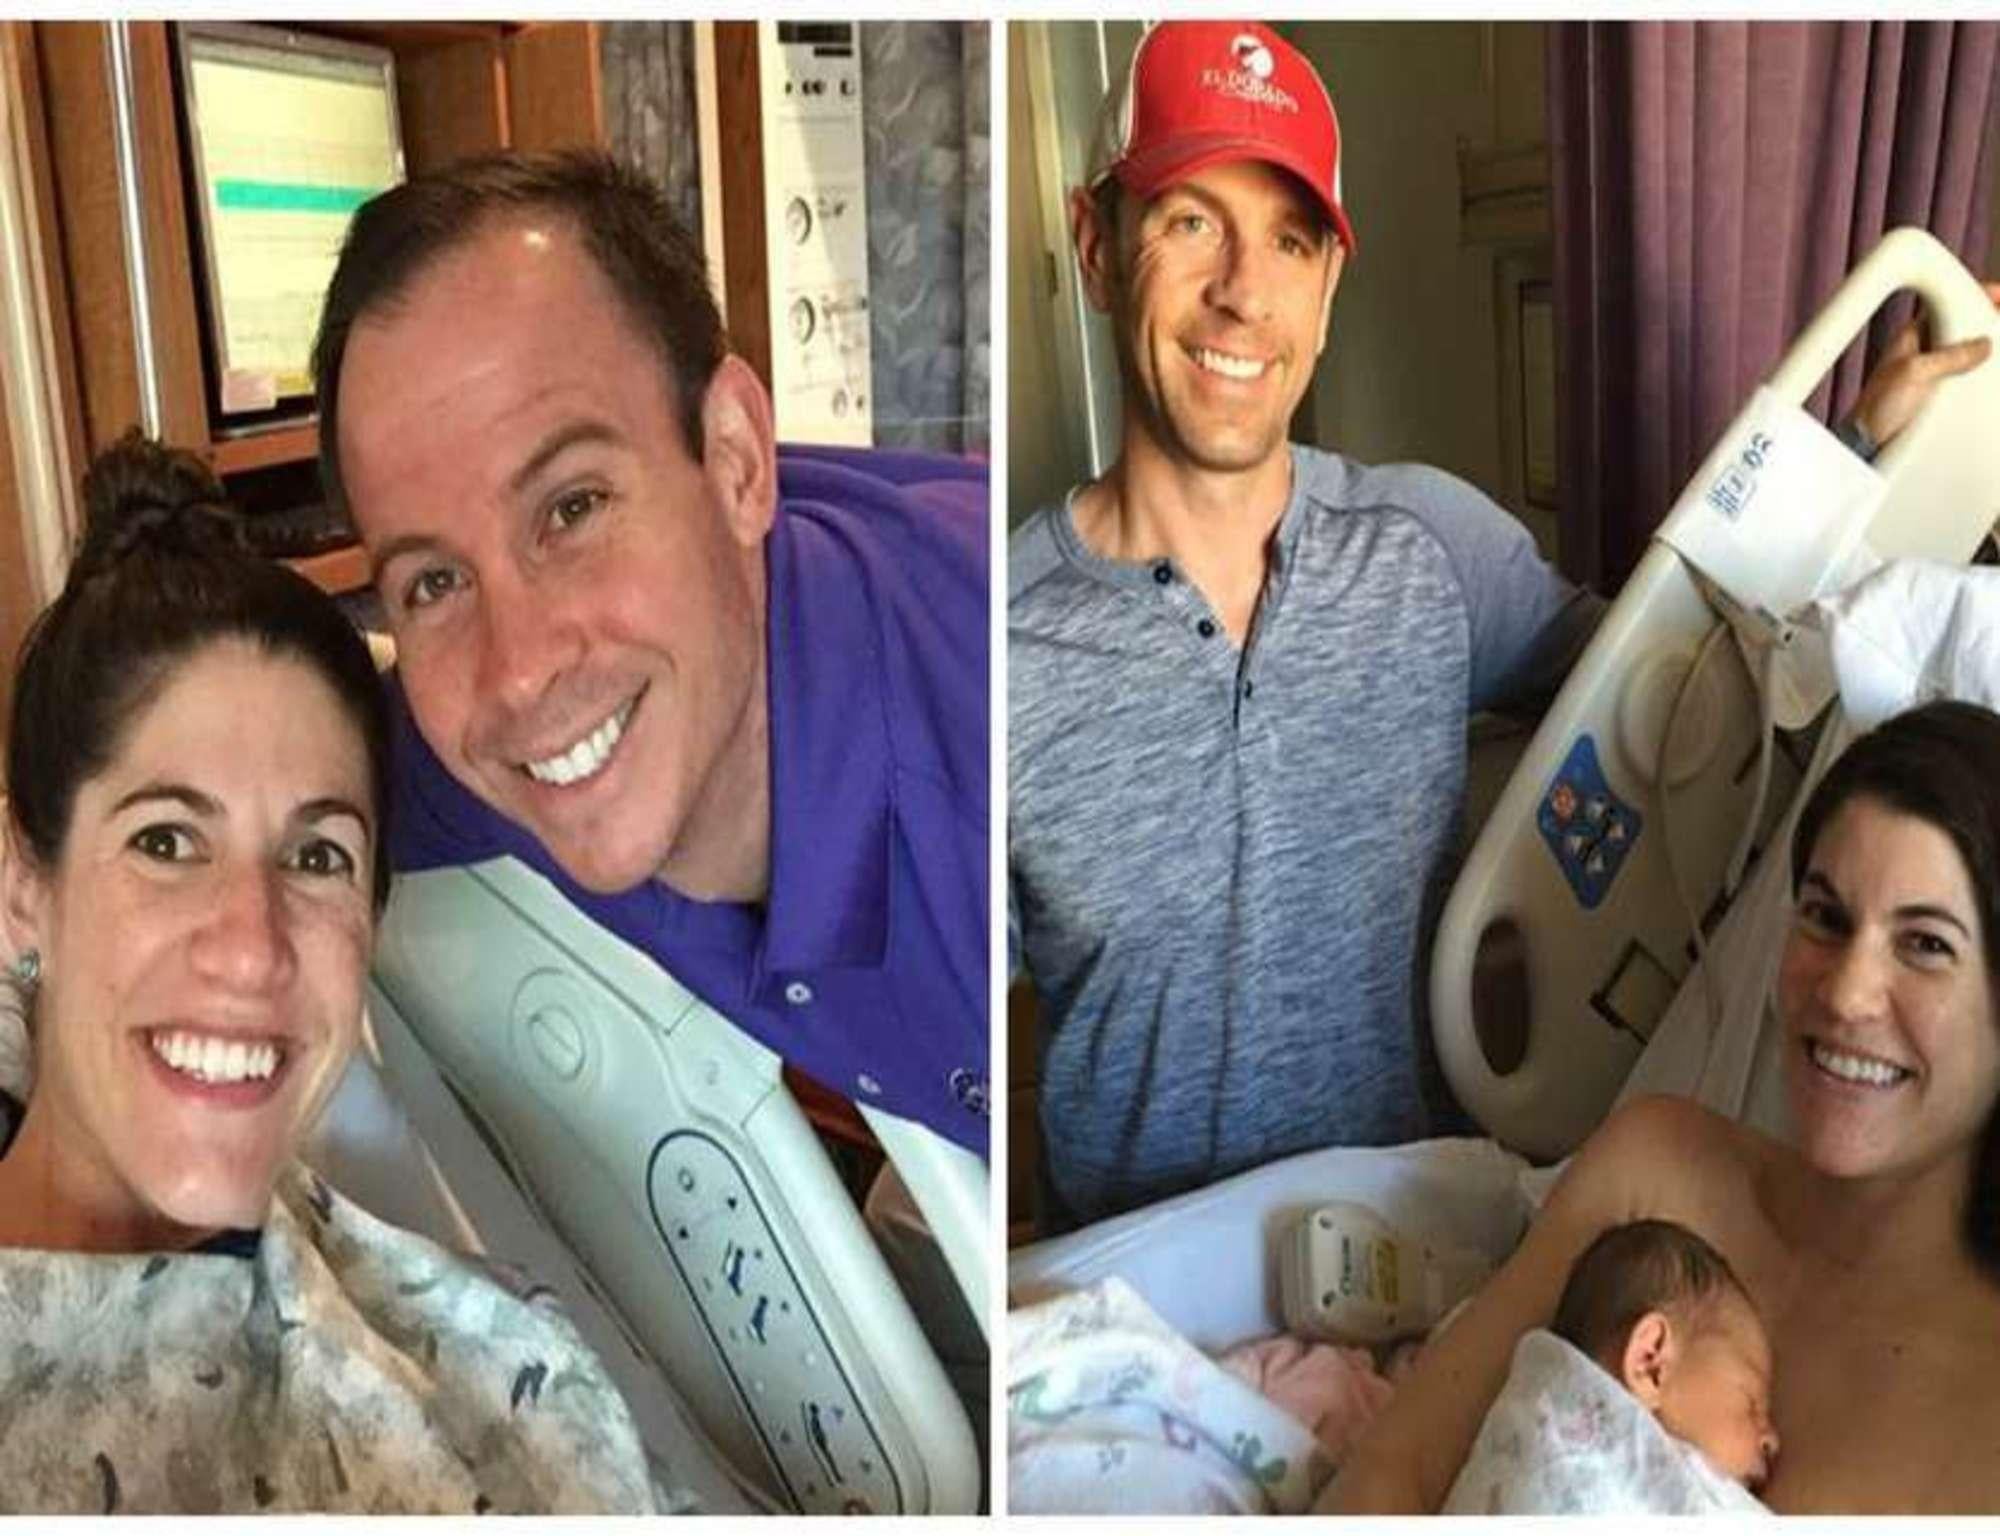 At 1.18am in Denver, then at 1.18am in La Jolla, two babies were born